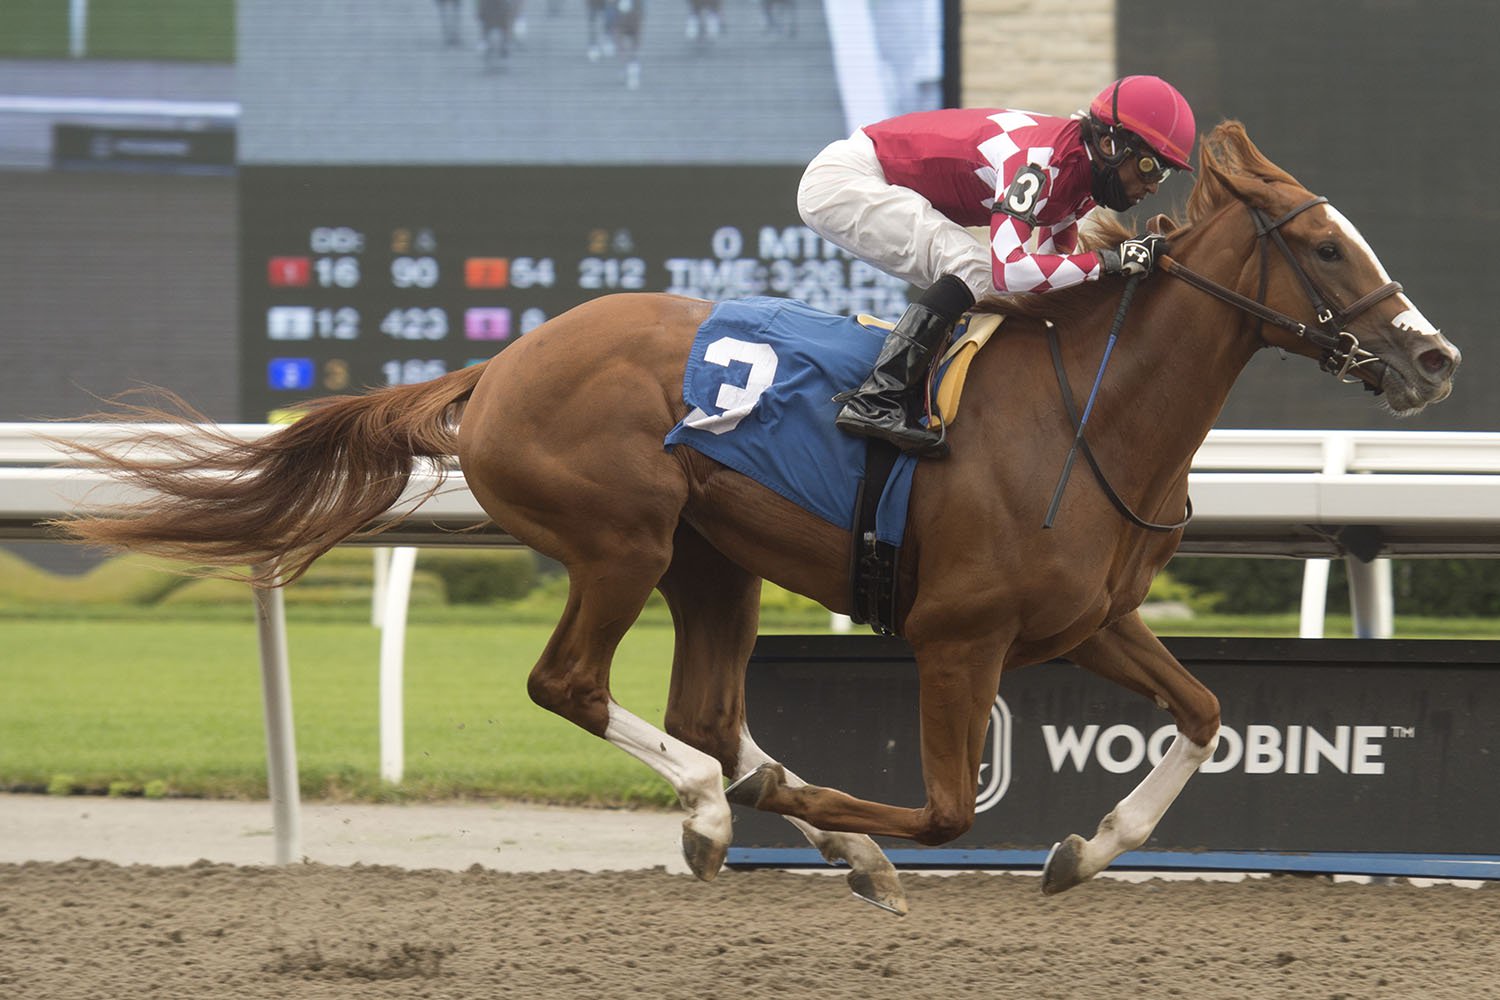 Lois Len victorious in her first start under jockey Patrick Husbands on July 3 at Woodbine Racetrack. (Michael Burns Photo)